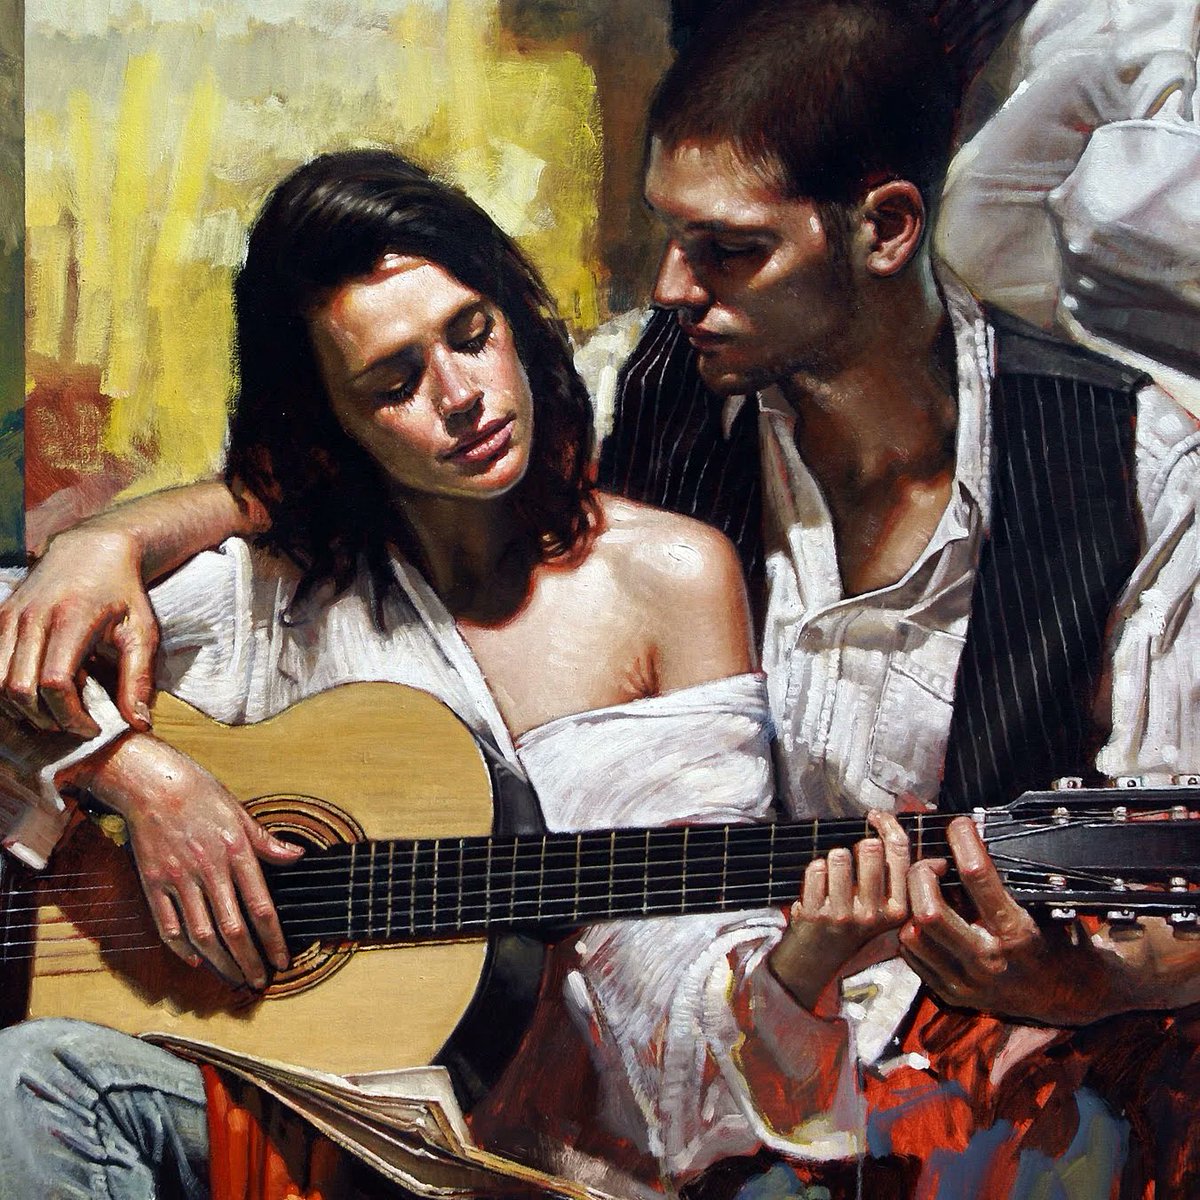 #Words #Art 'Where, My Lord, is music bred—upon the instrument or within the ear that listens? The loveliness of woman is created in the eye of man.' #BornOnThisDay Karen Blixen 🖌Diego Dayer🇦🇷 @AlessandraCicc6 @lomazzi_r @BrindusaB1 @gherbitz @Barbaga3Gaetano @robert6856